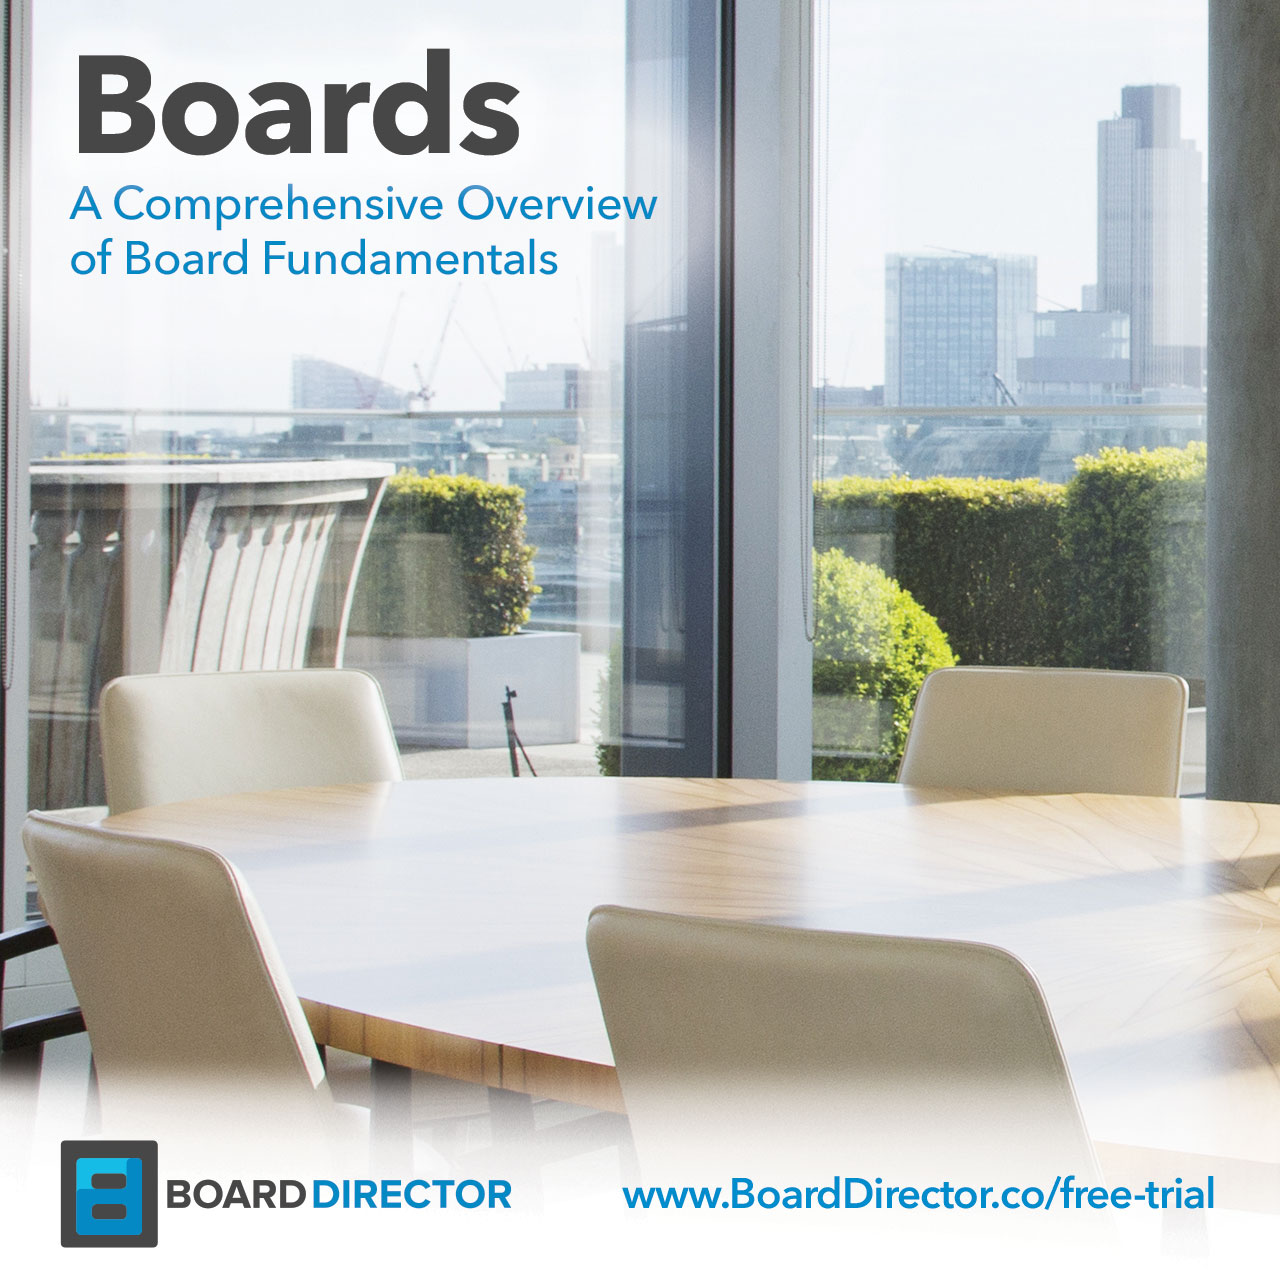 Boards Overview